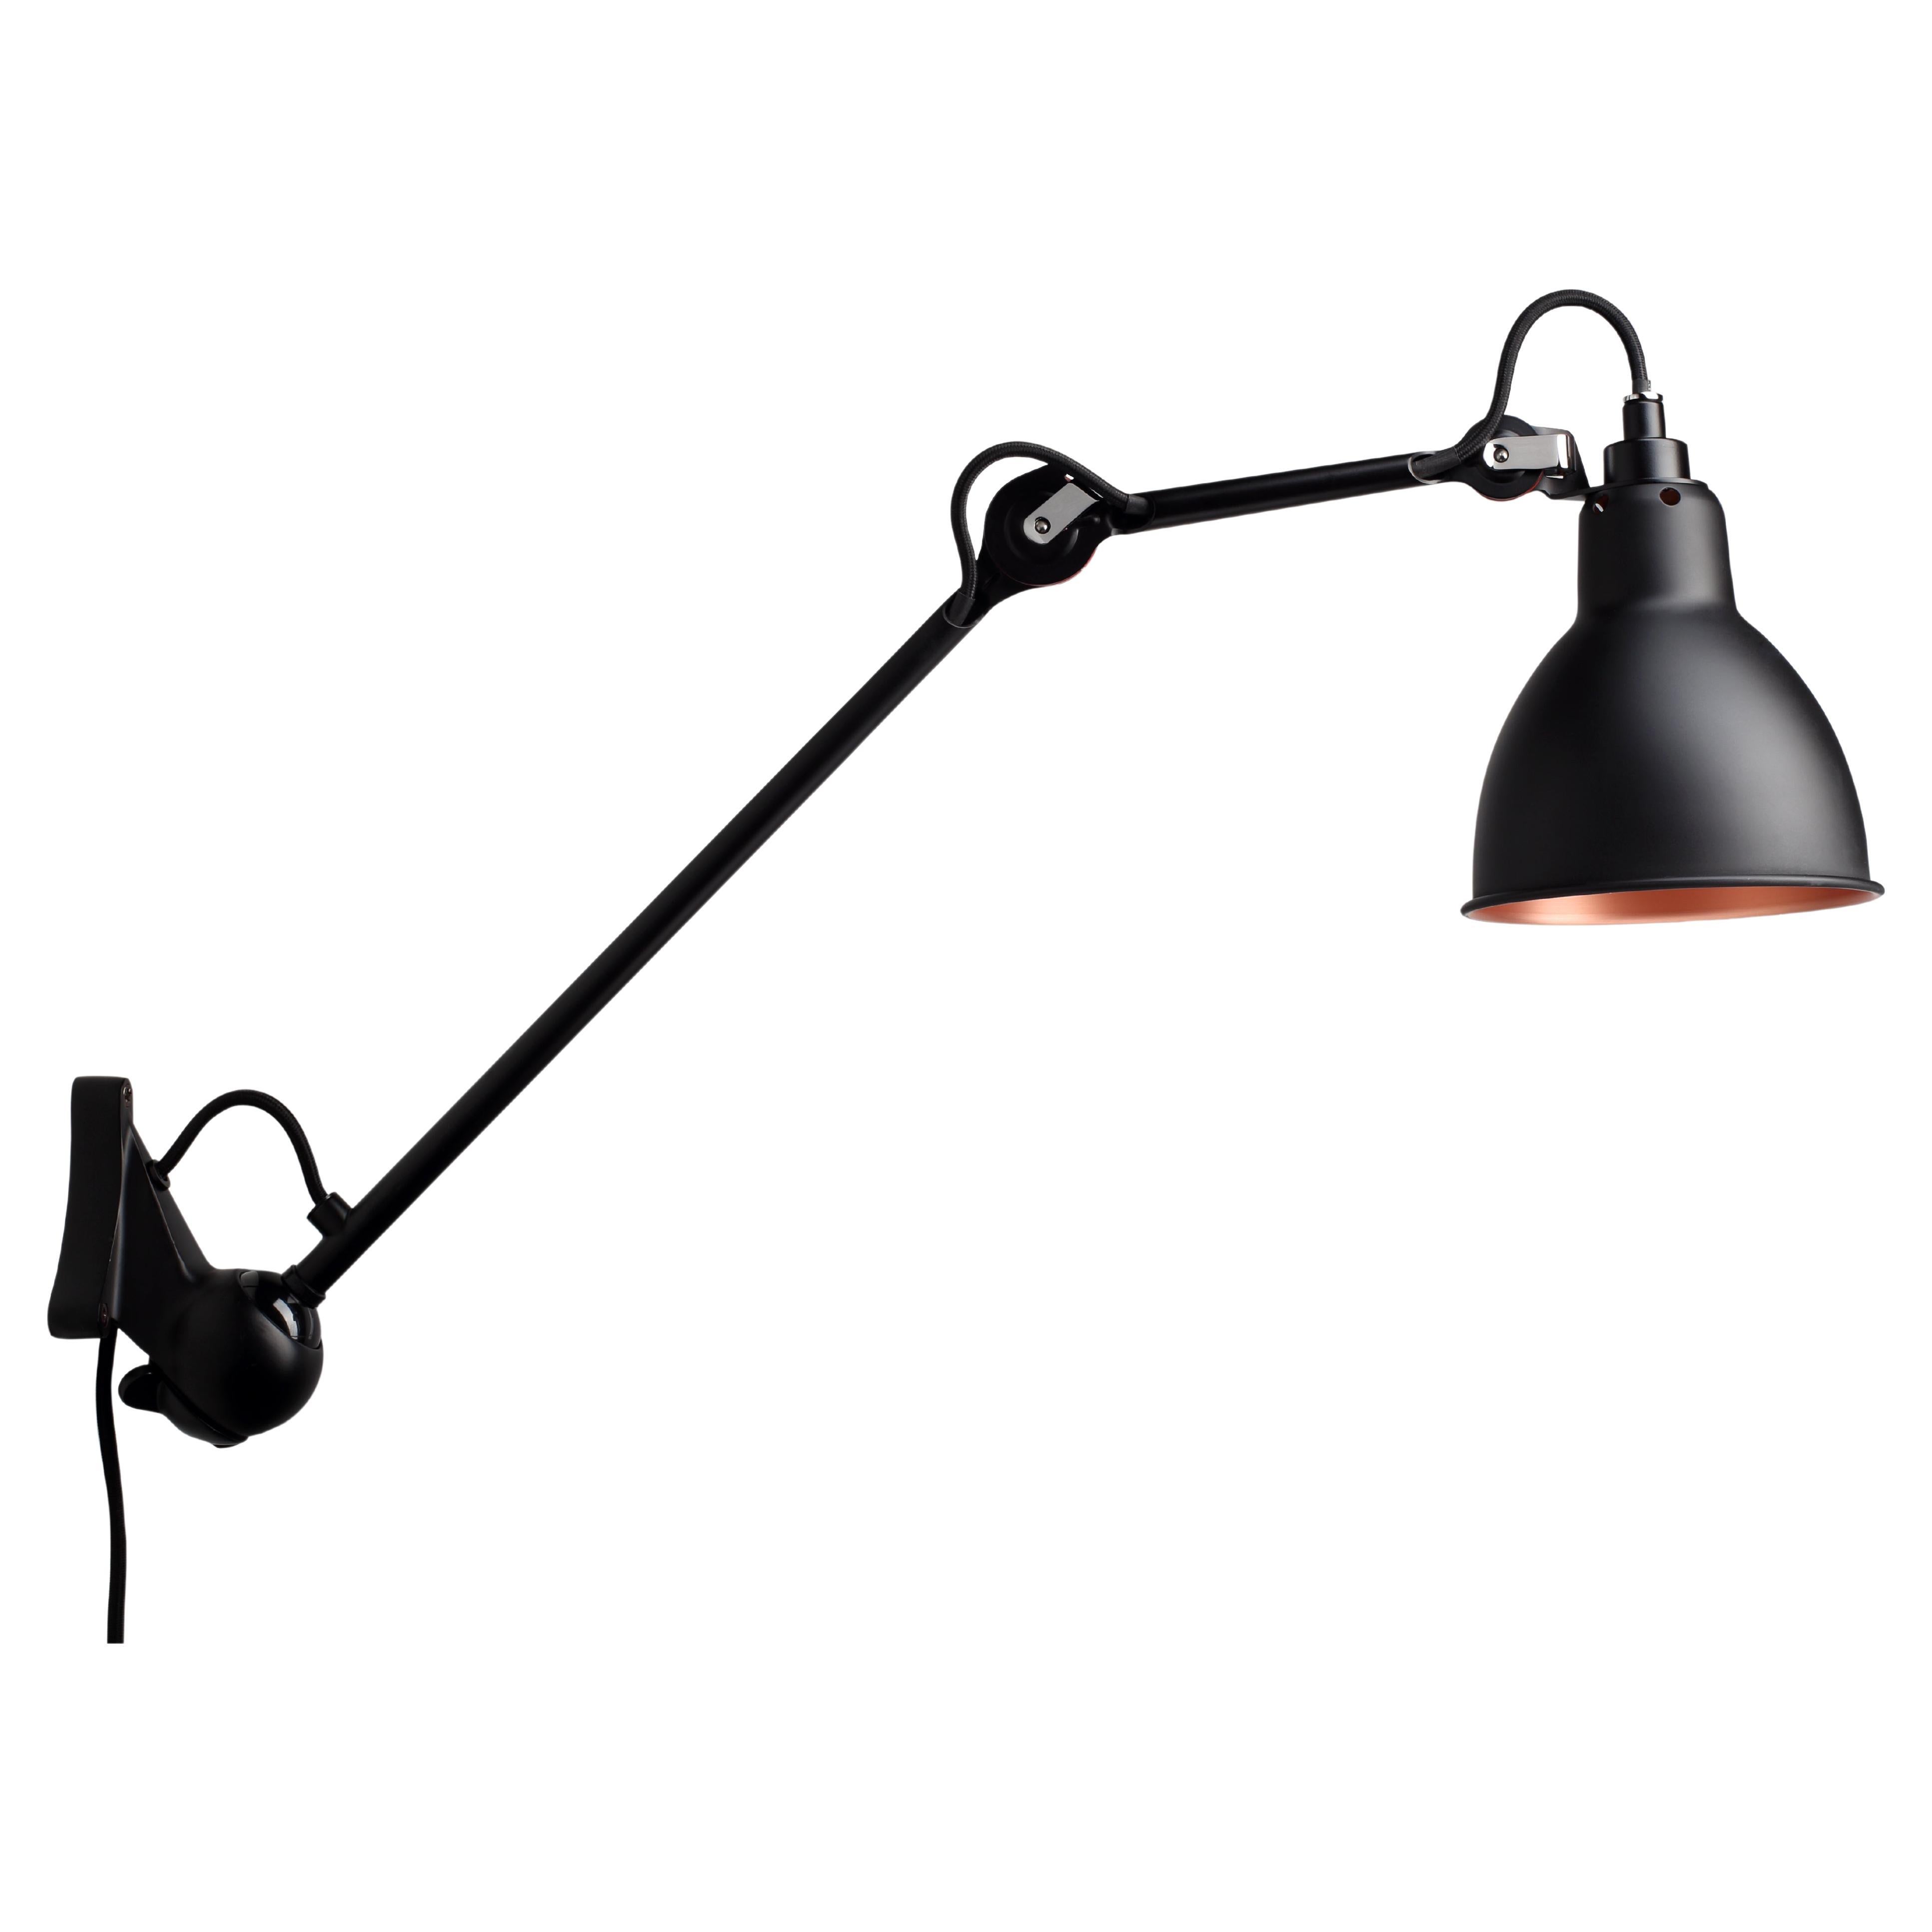 DCW Editions La Lampe Gras N°222 Wall Lamp in Black Arm and Black Copper Shade For Sale